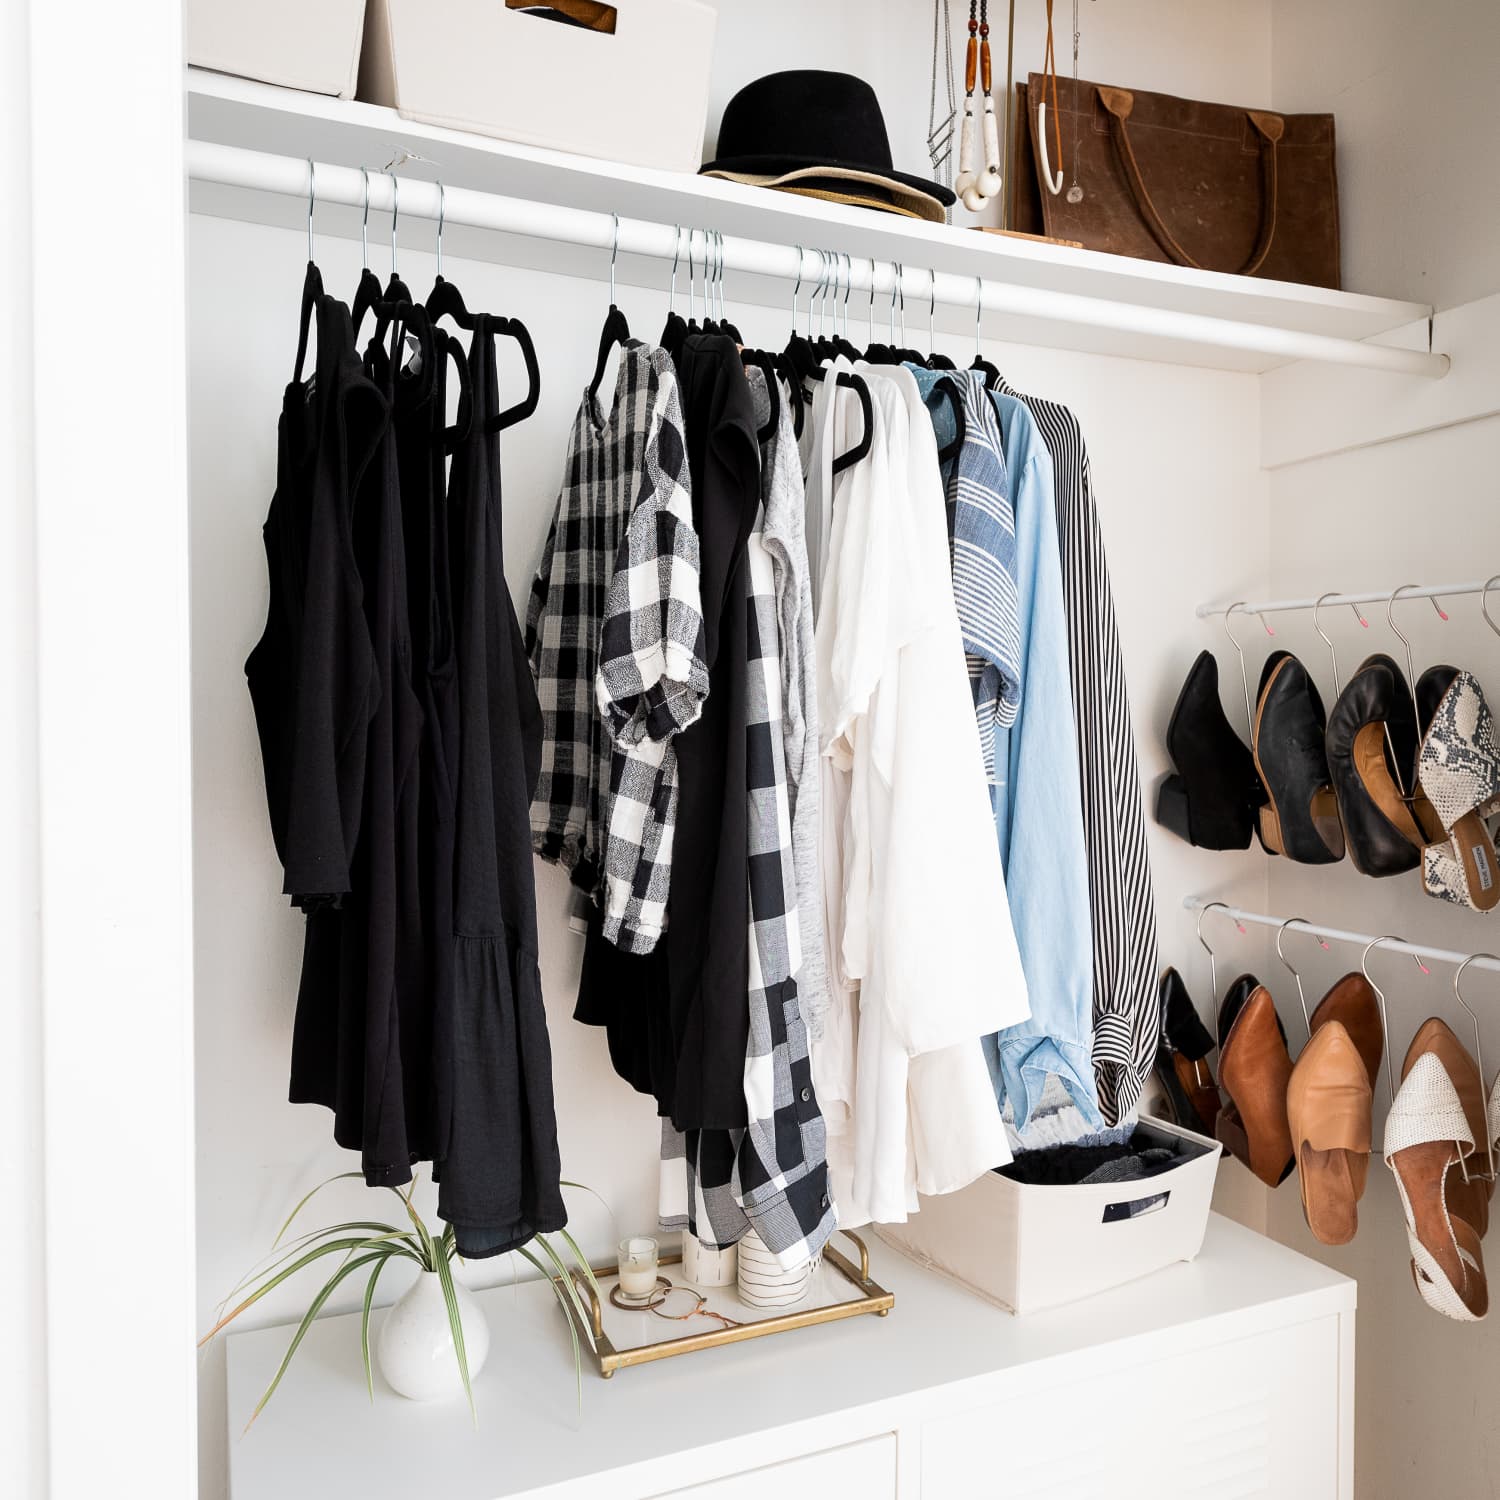 34 Closet Organizing Ideas to Steal  Shoe shelves, Shoe storage, How to  store shoes